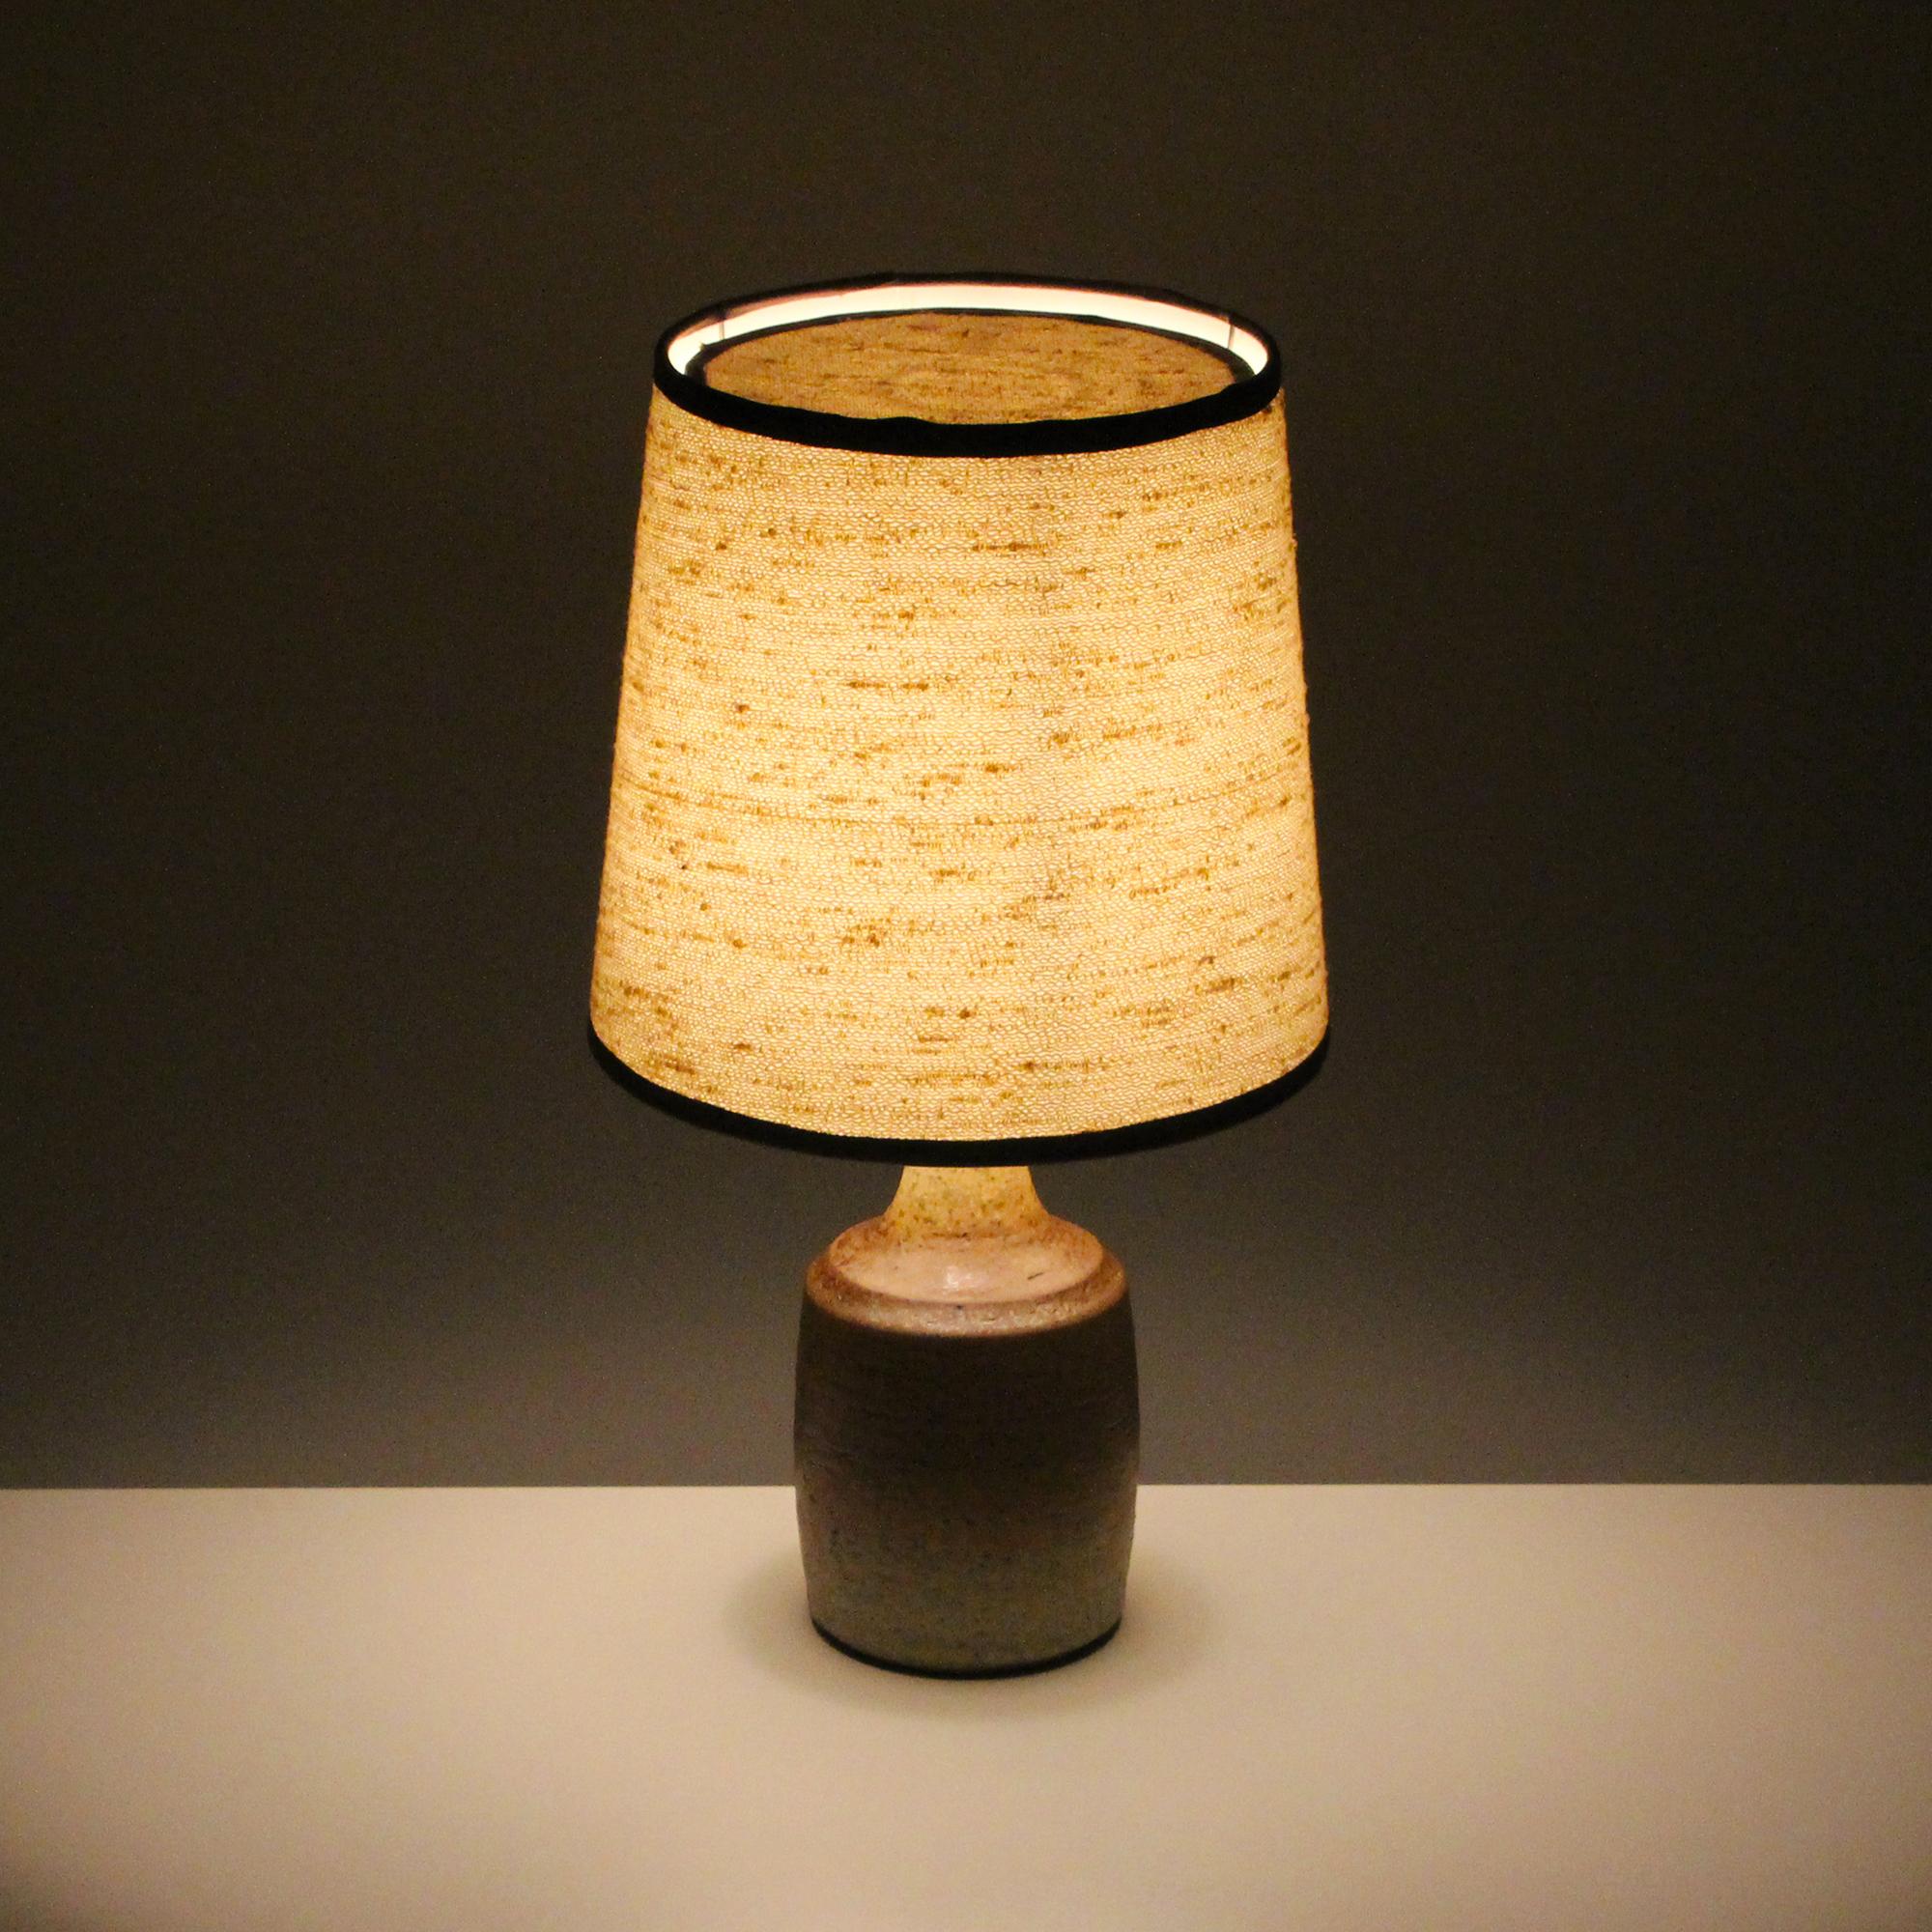 Late 20th Century Ceramic Table Lamp by Soholm Stentoj 1970s, with Vintage Shade Included